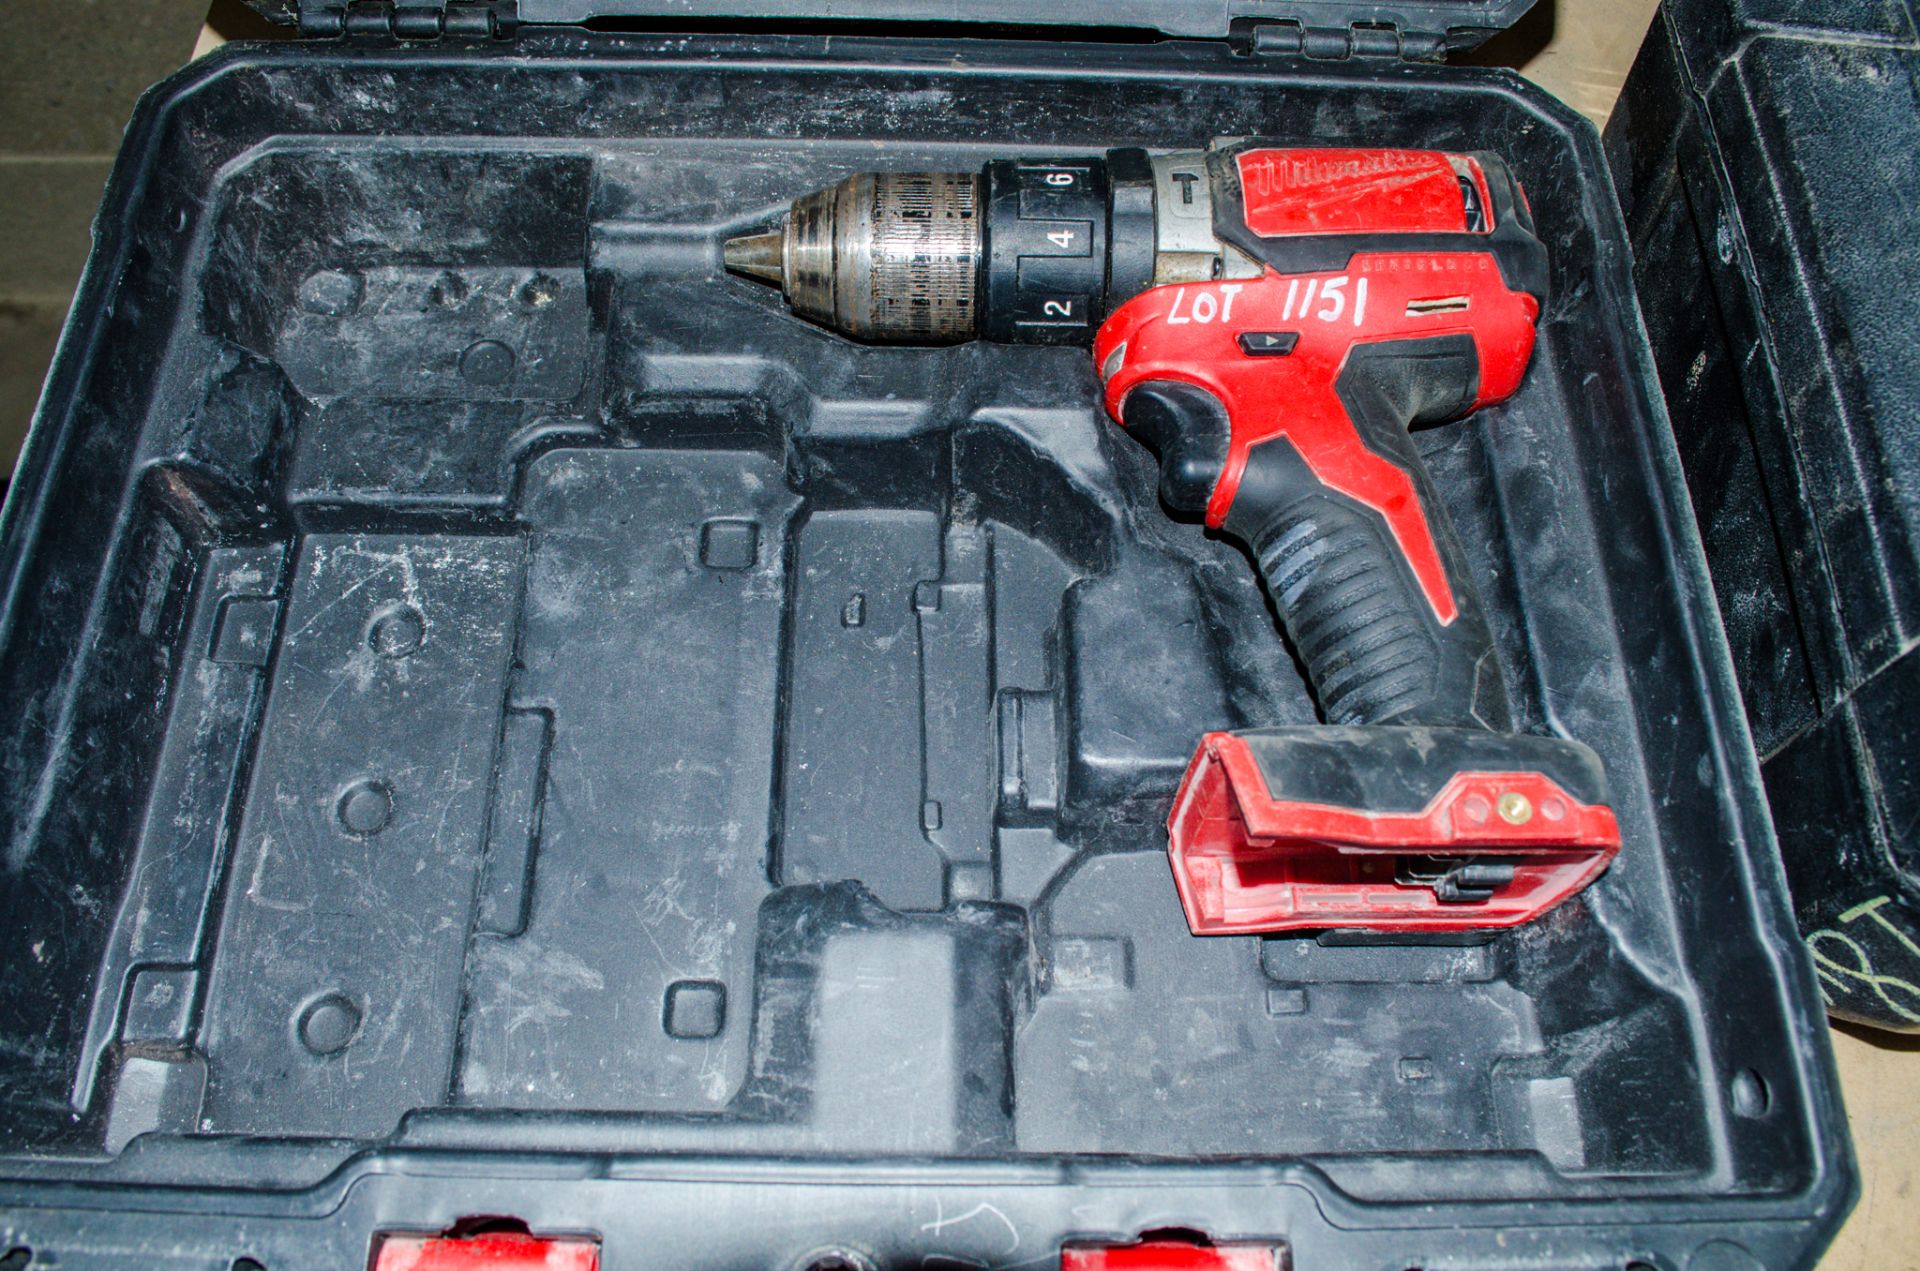 Milwaukee M18 BLPD 18v cordless power drill c/w carry case ** No battery or charger ** AS8302